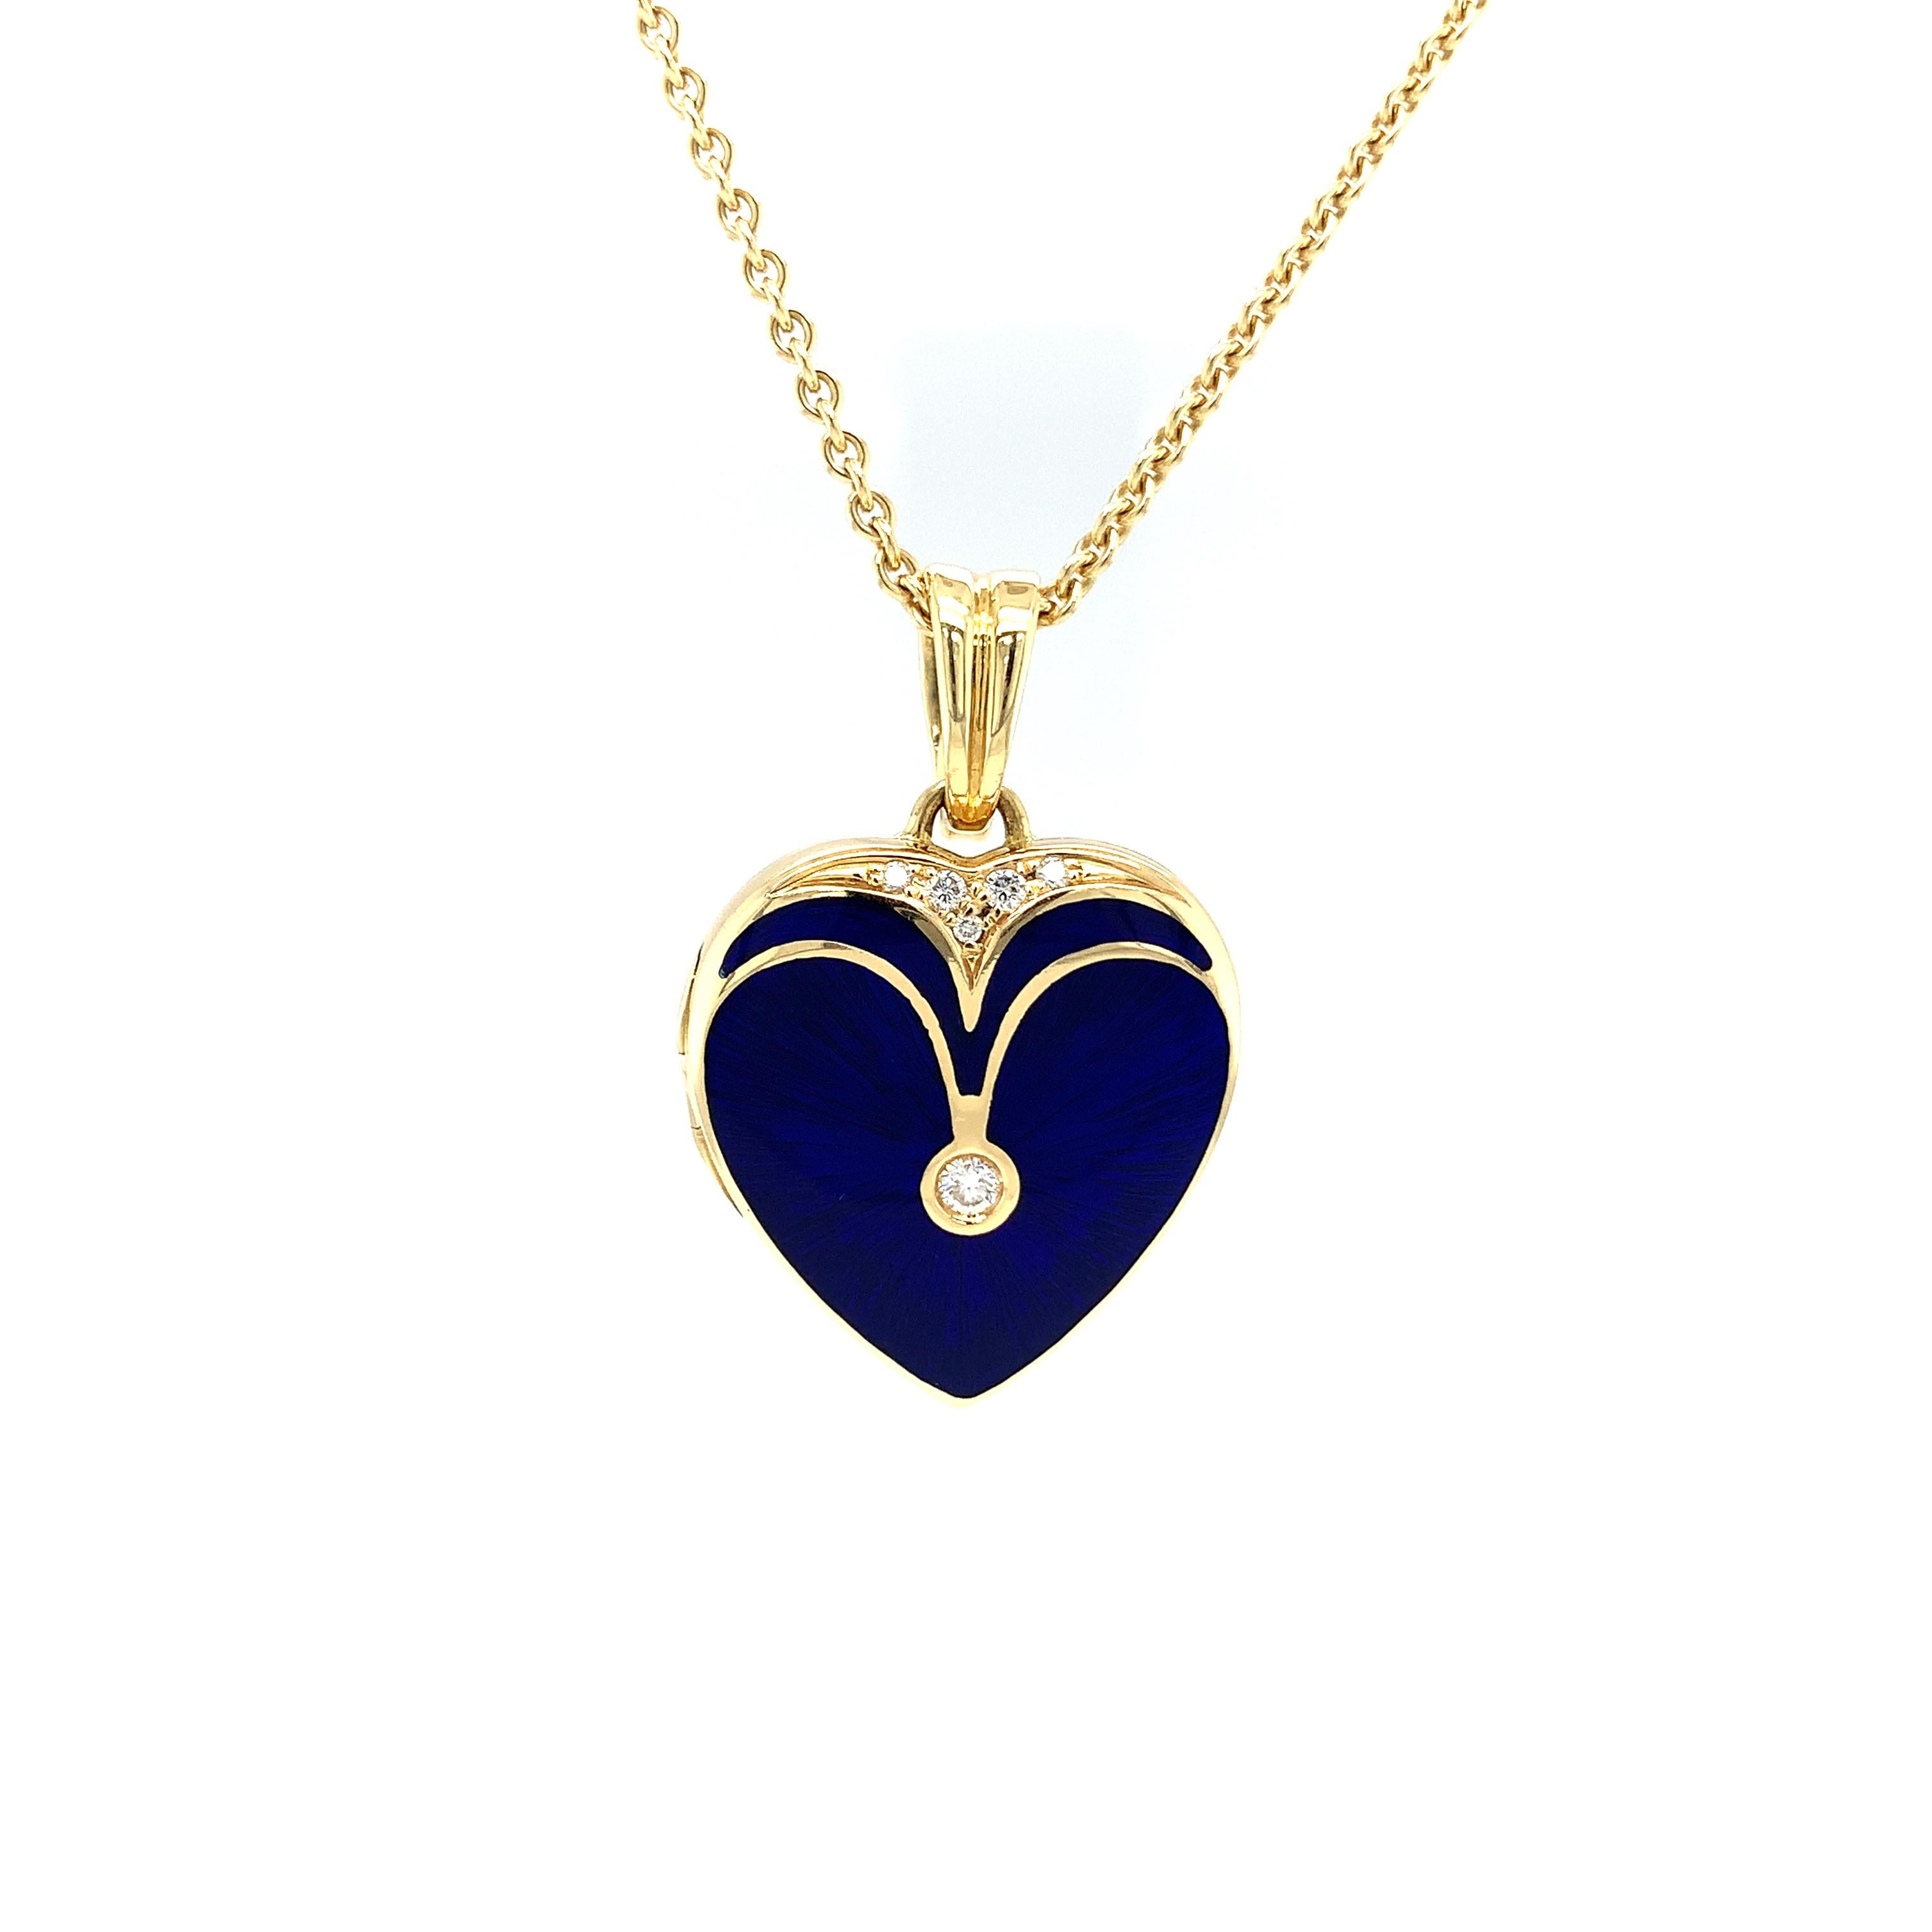 Victor Mayer customizable heart shaped pendant locket necklace 18k yellow gold, dark blue vitreous enamel, 6 diamonds, total 0.12 ct, H VS

About the creator Victor Mayer
Victor Mayer is internationally renowned for elegant timeless designs and